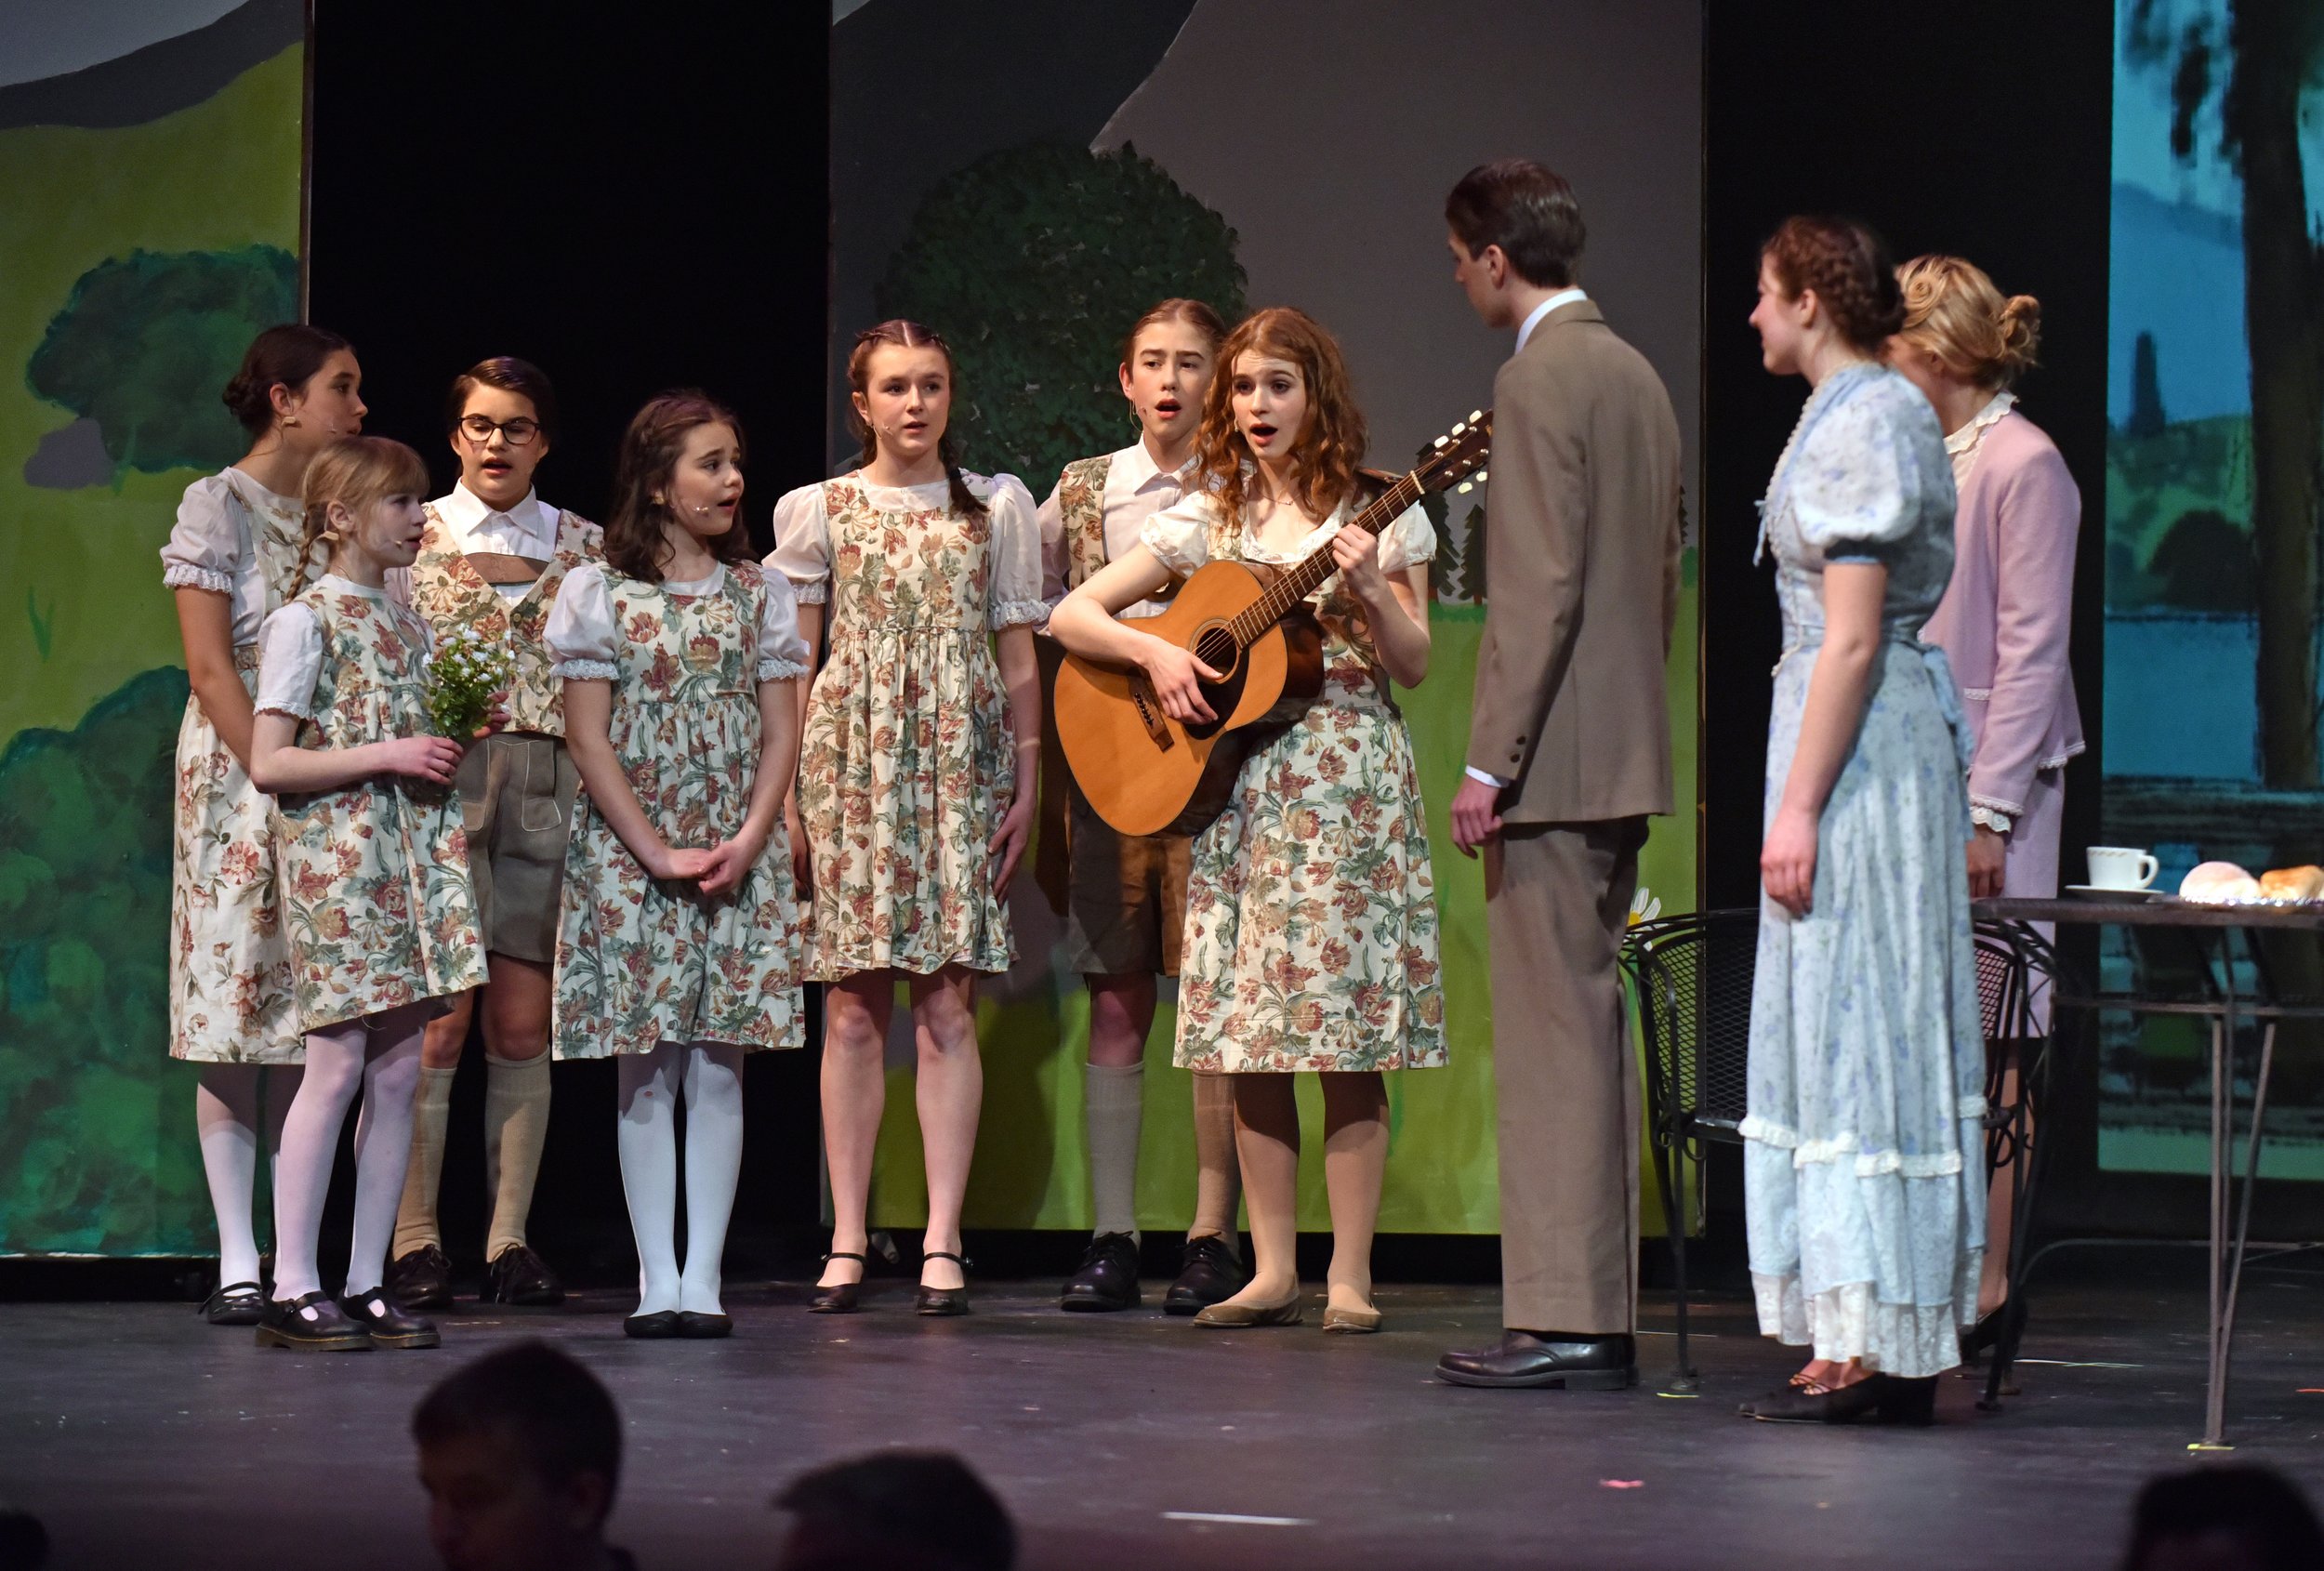  The Von Trapp children with the captain, Maria and Elsa. Photo by Gordon Miller 